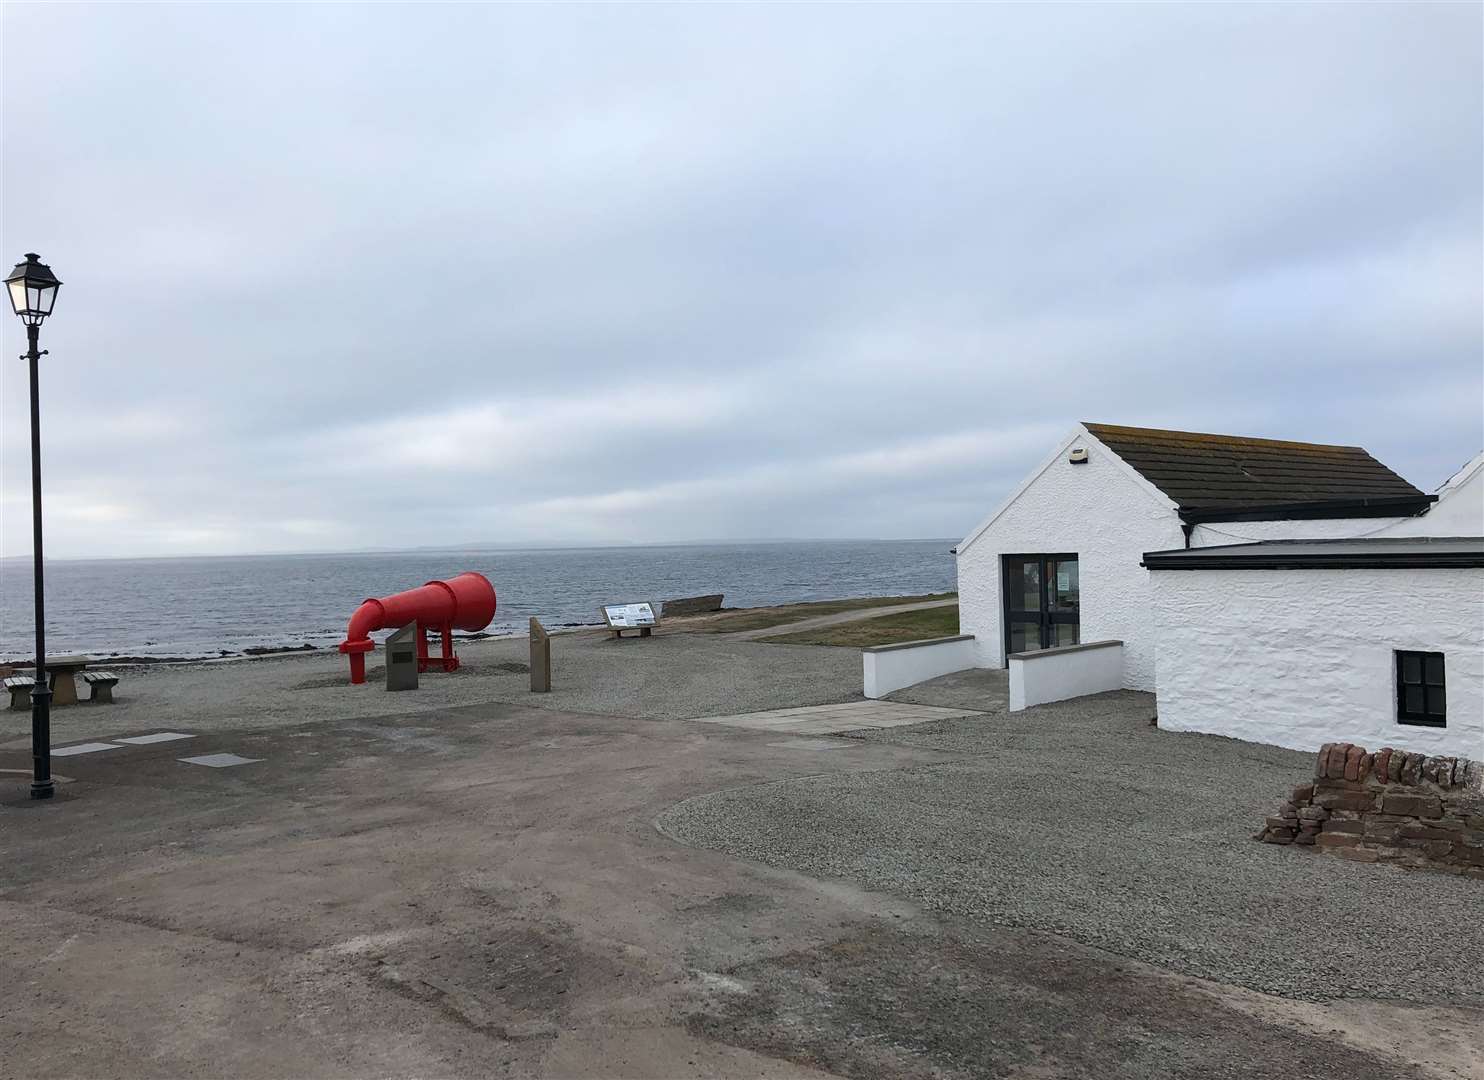 The former Duncansby foghorn makes an impressive sight in its new home at John O'Groats.